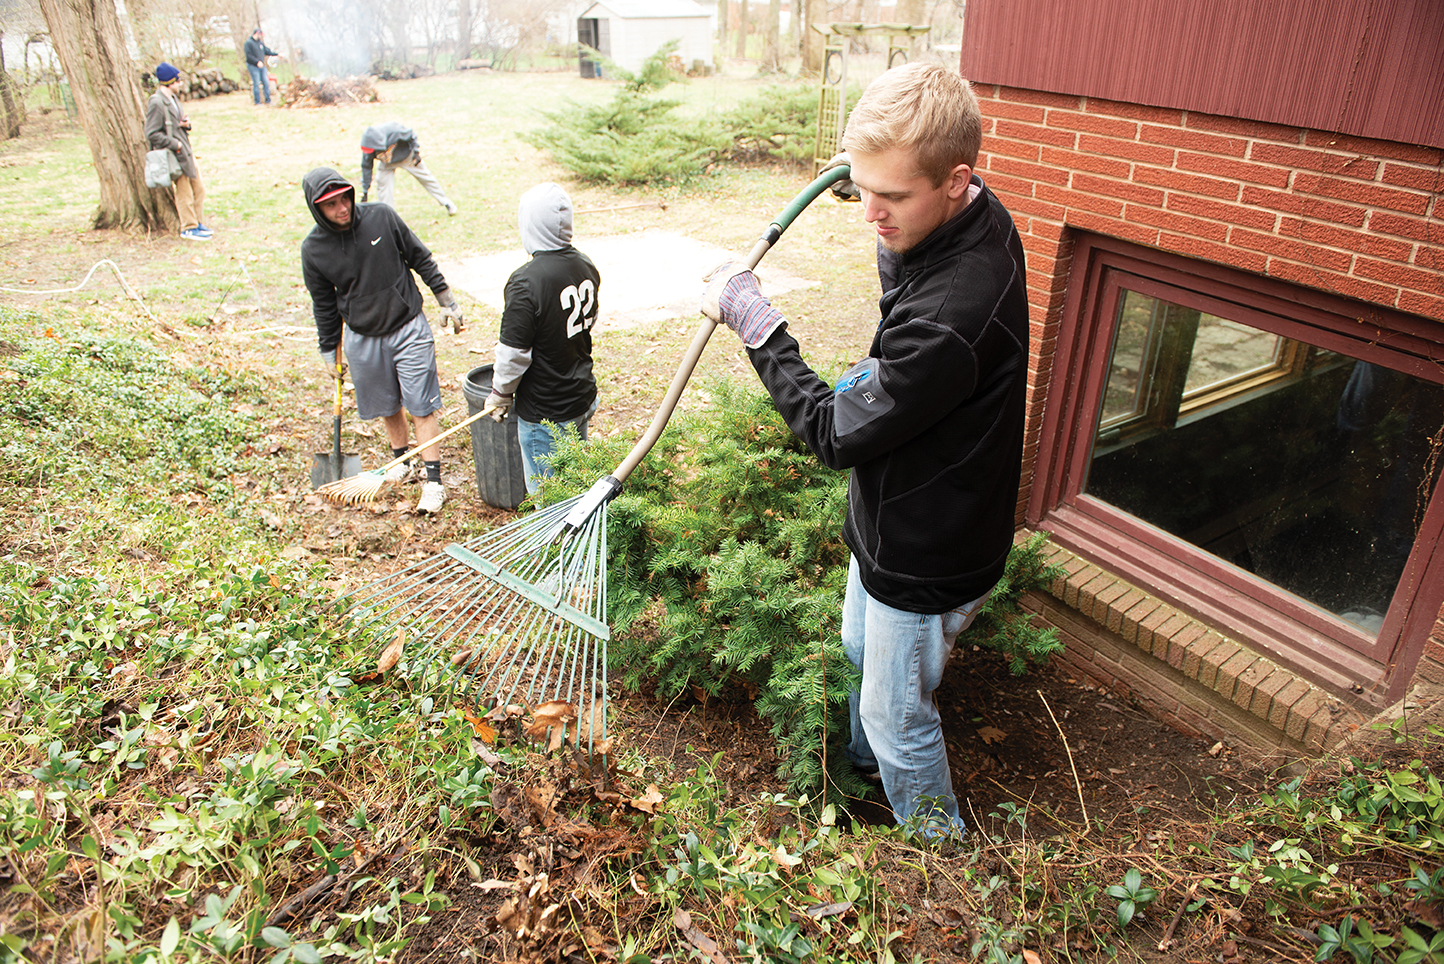 Last April, more than 170 students spread out across Bloomington-Normal to lend a hand to residents and community organizations for the 10th annual Bring It Back to Normal. Students raking and do outside chores at a home.